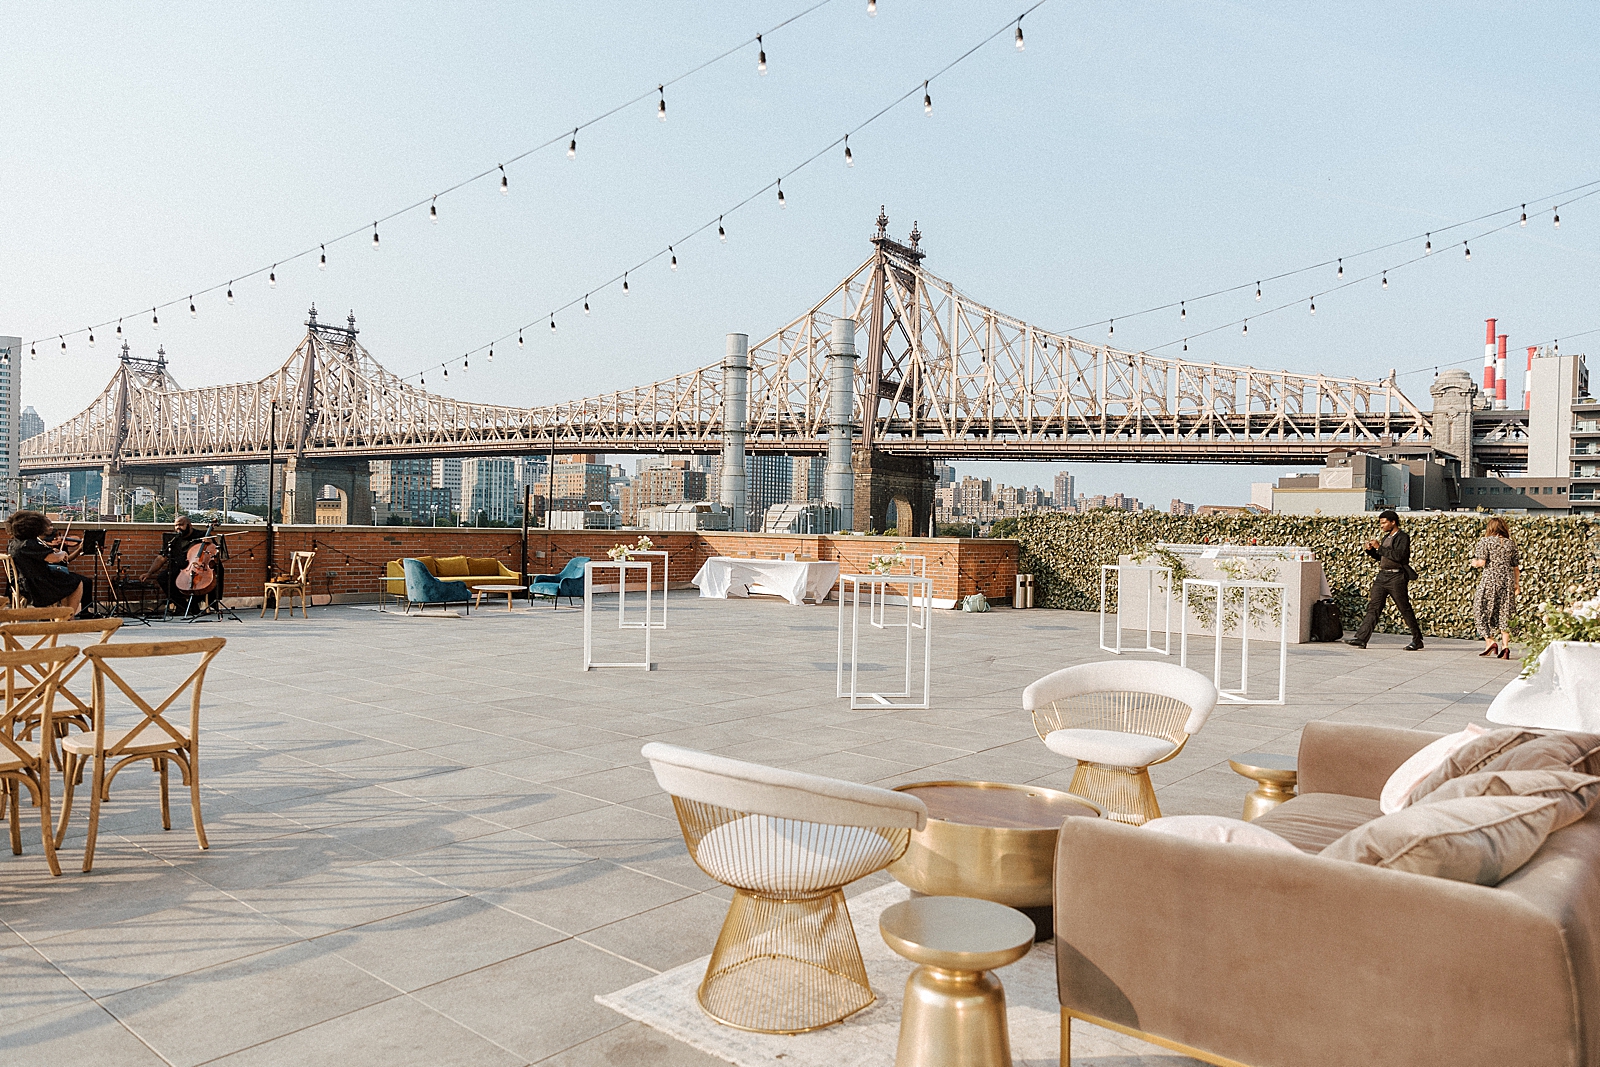 Detail shot of cocktail hour area with string musicians and queensboro bridge